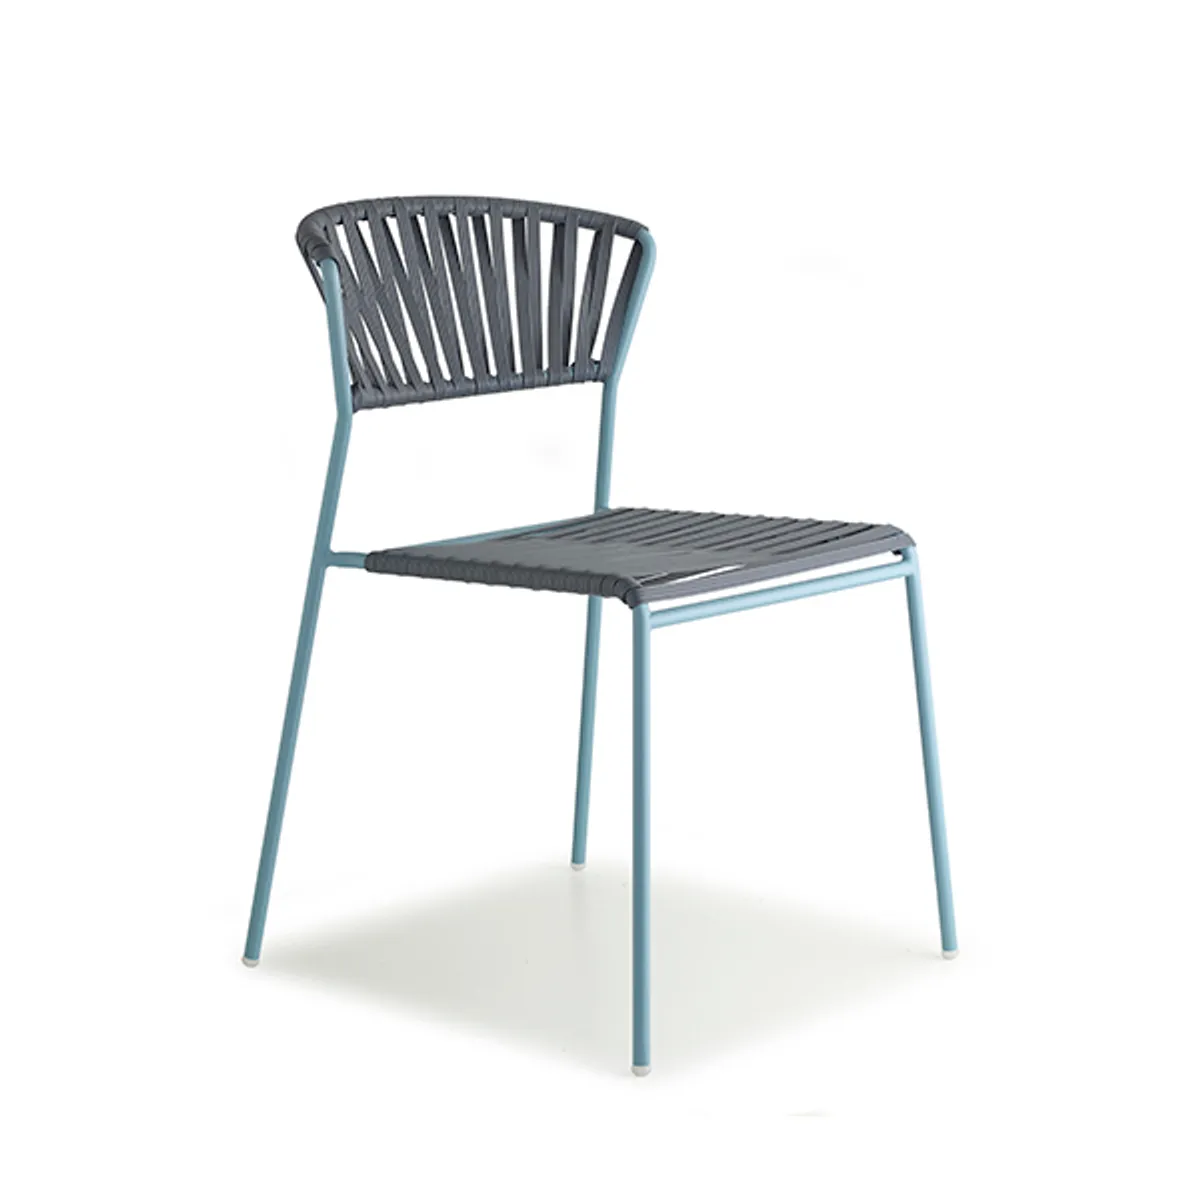 Robyn Pvc Exterior Chair For Commercial Use Inside Out Contracts